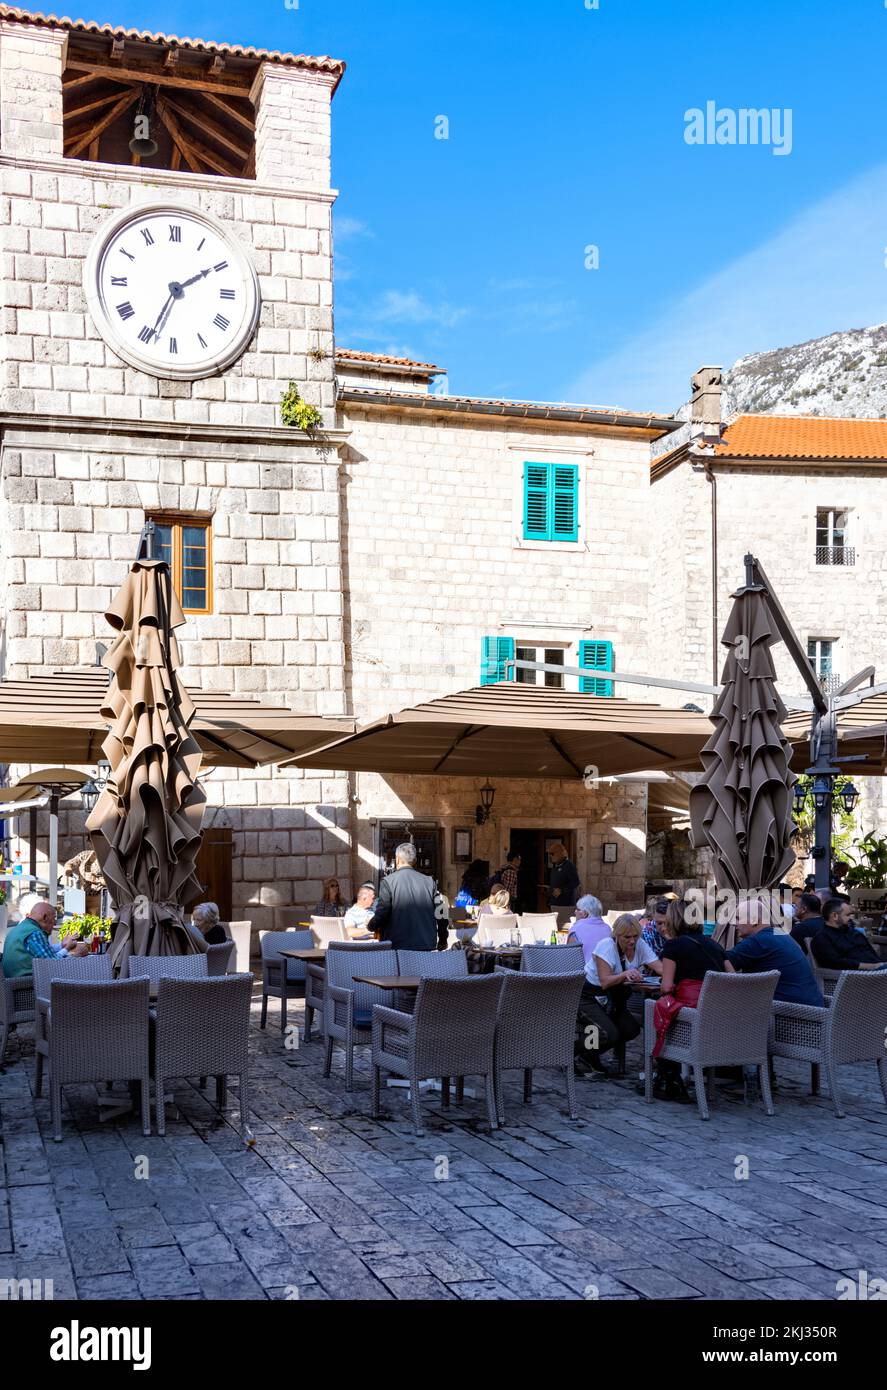 Clock tower and restaurants, Square of Arms, Kotor Old Town, Montenegro Stock Photo